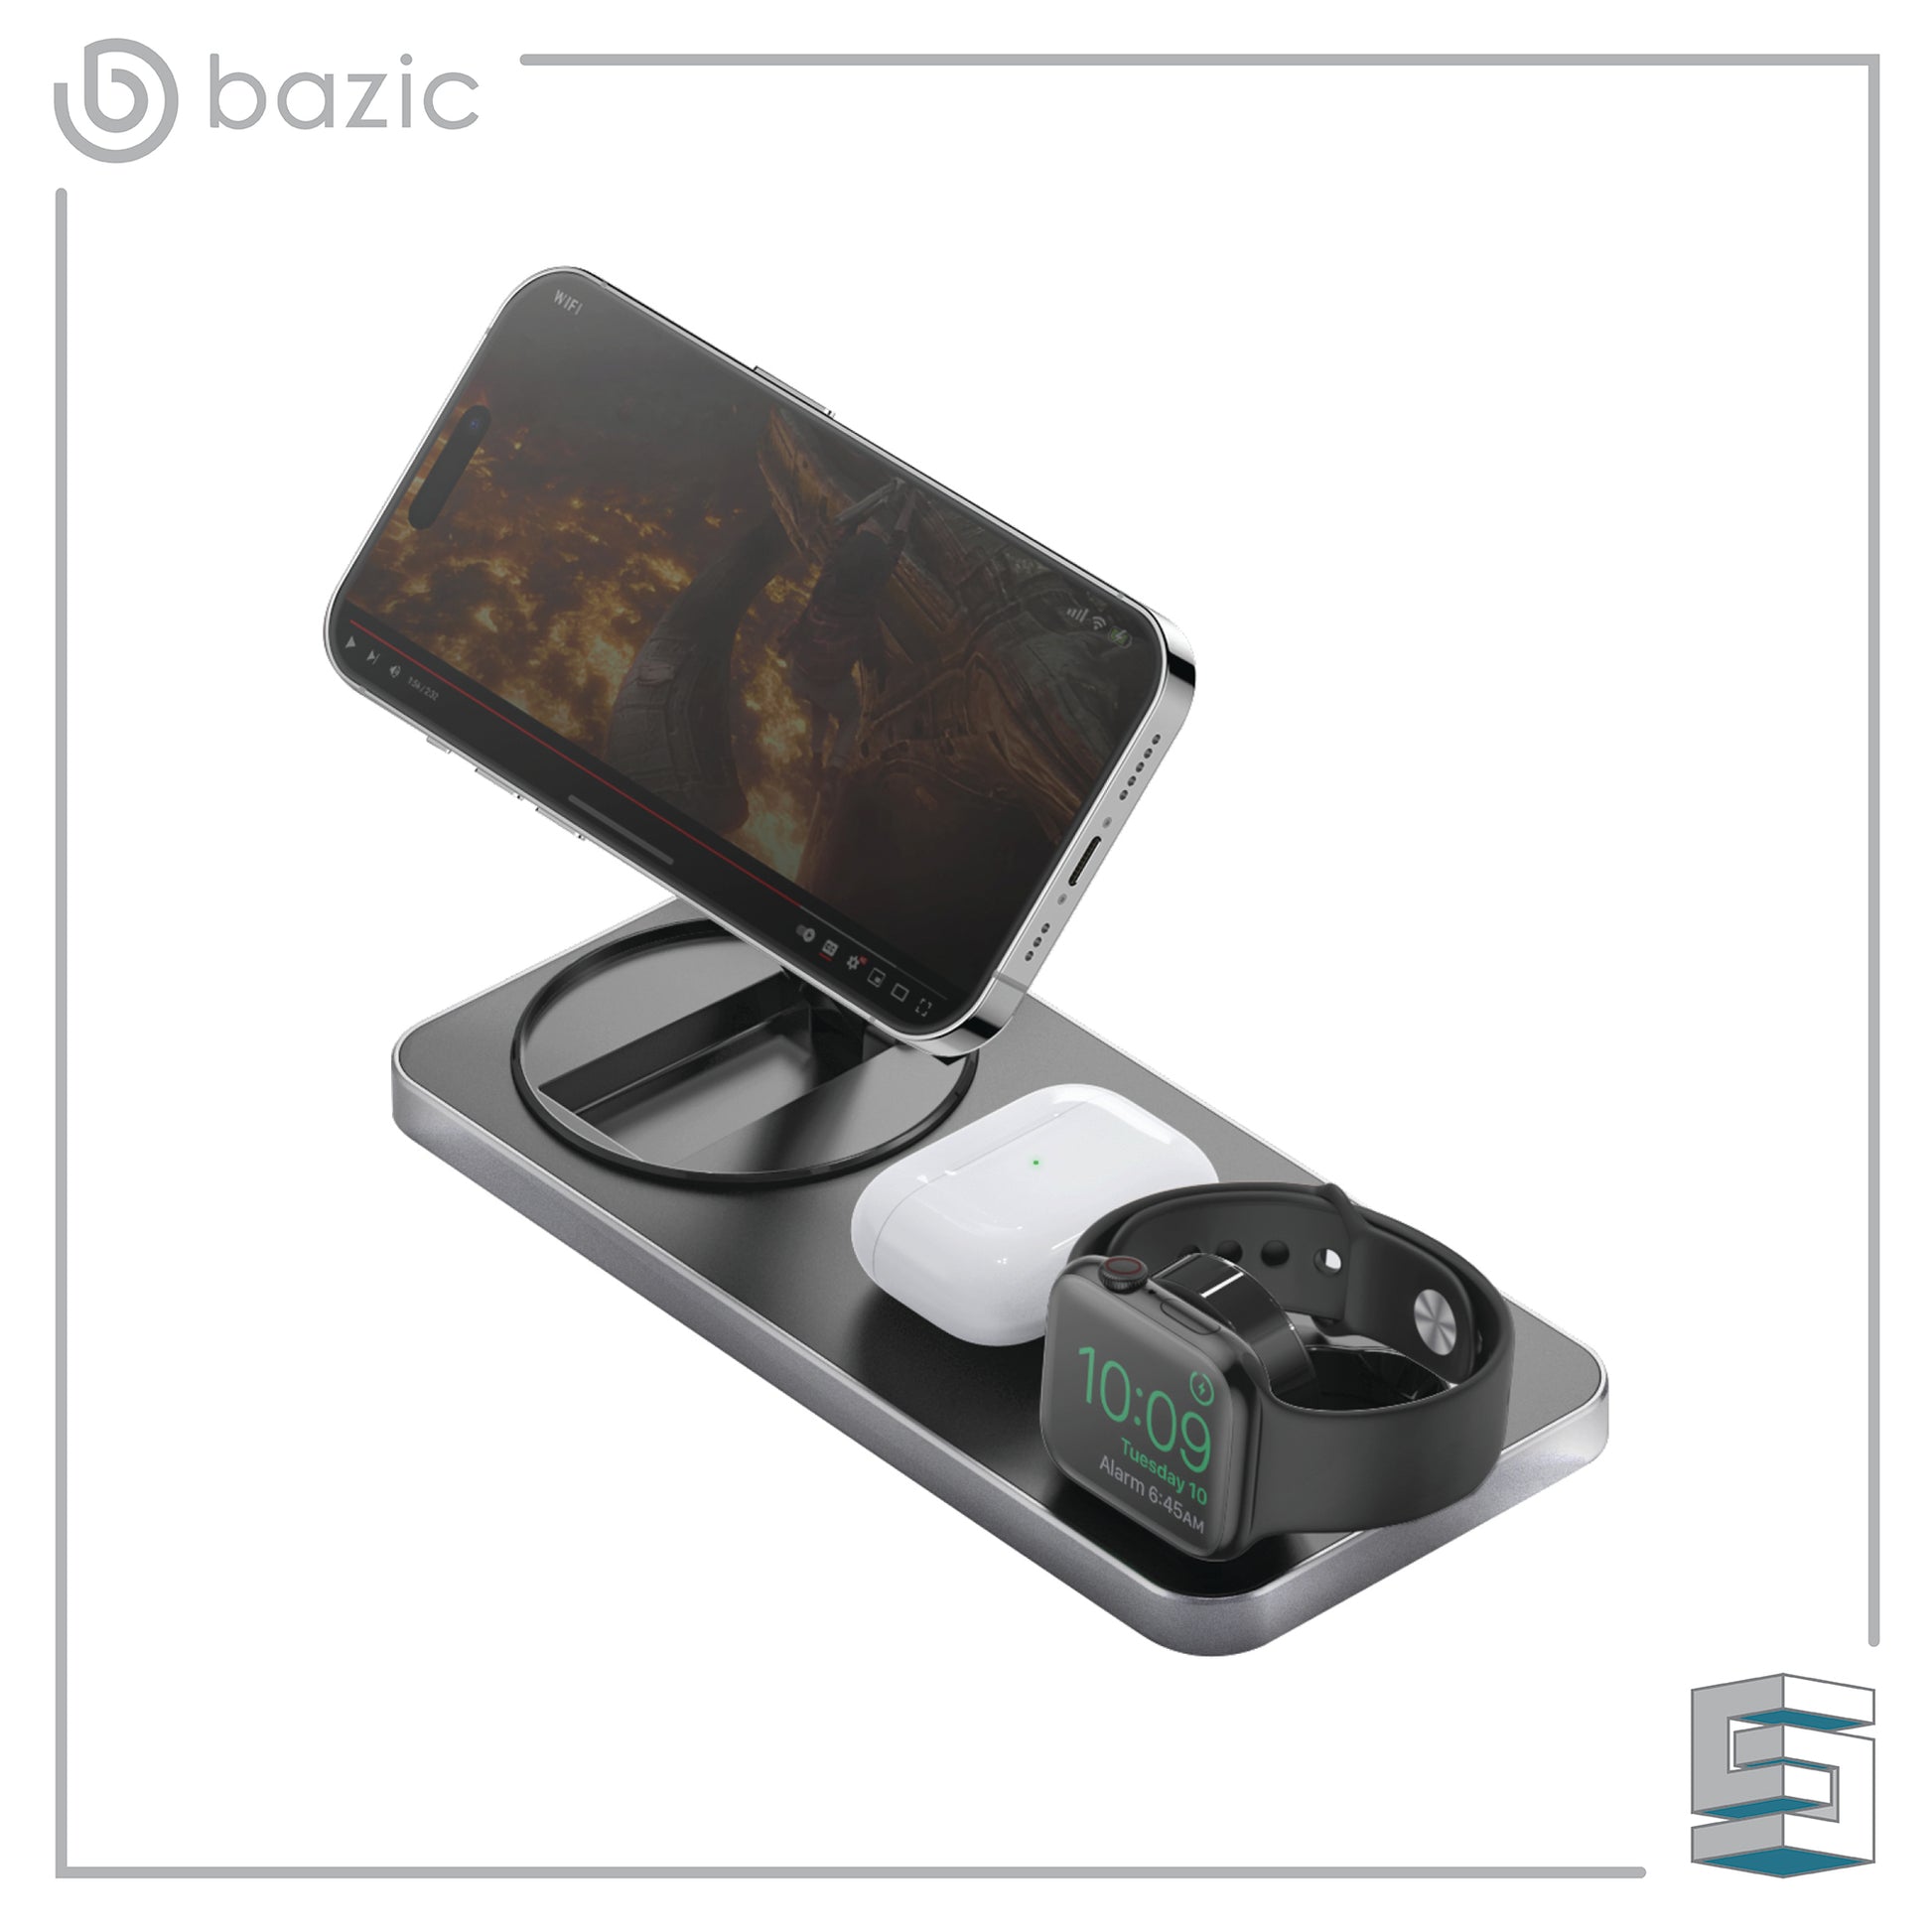 3-in-1 Foldable Wireless Charging Stand - ENERGEA Bazic GoMag Station Global Synergy Concepts